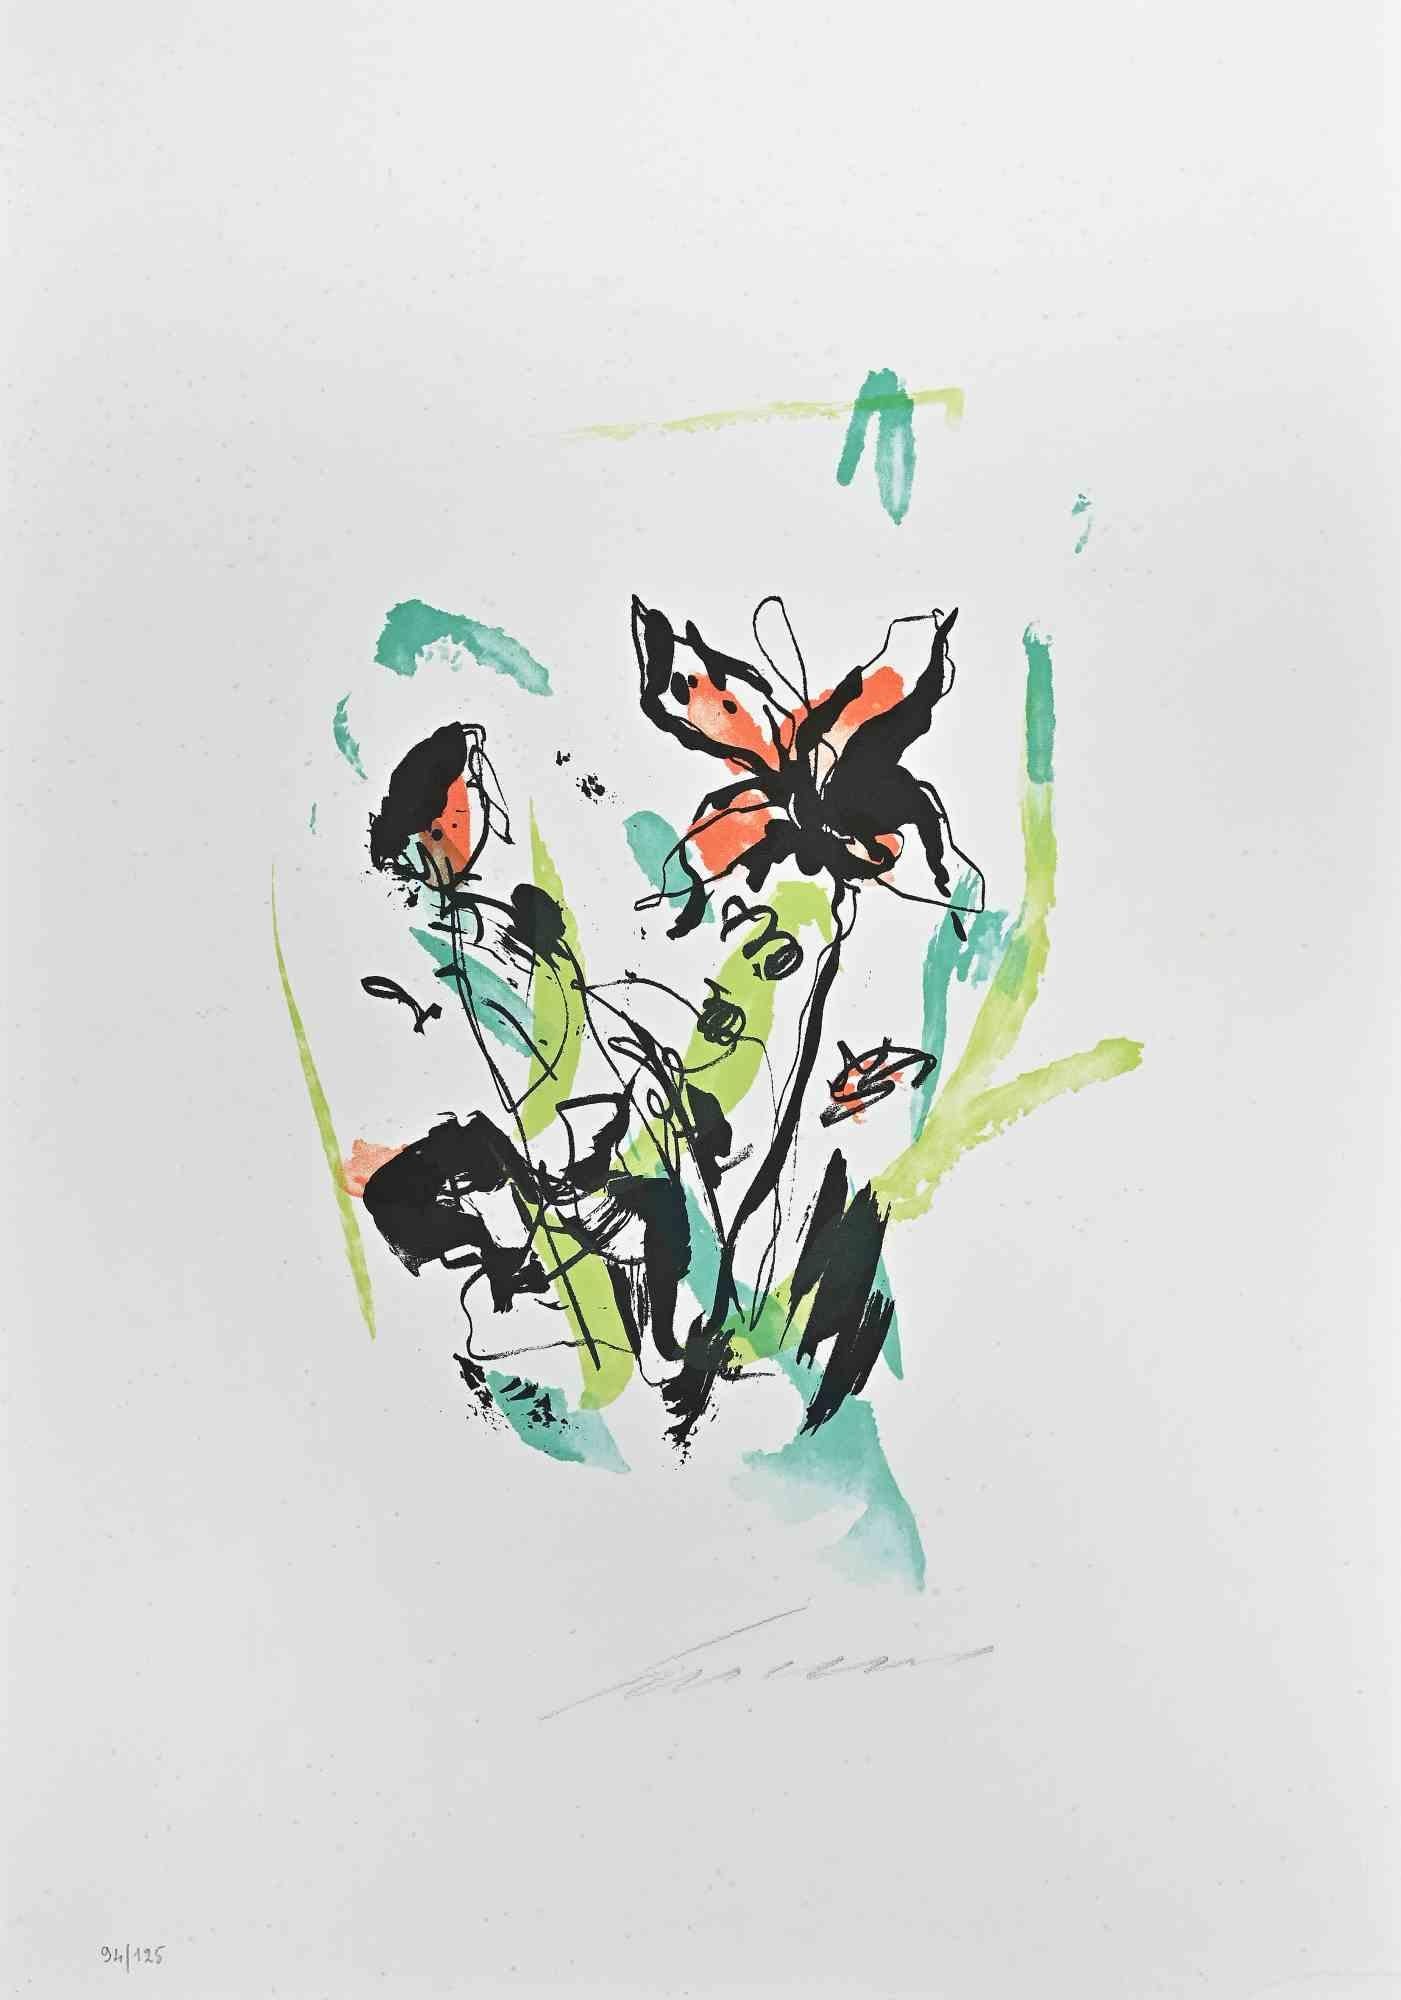 Flowers is a Lithograph realized by Ernesto Treccani in 1973.

Limited edition of 125, editor "La Nuova Foglio SPA".

Very good condition on a white cardboard.

Hand-signed and numbered by the artist with pencil on the lower margin.

Ernesto